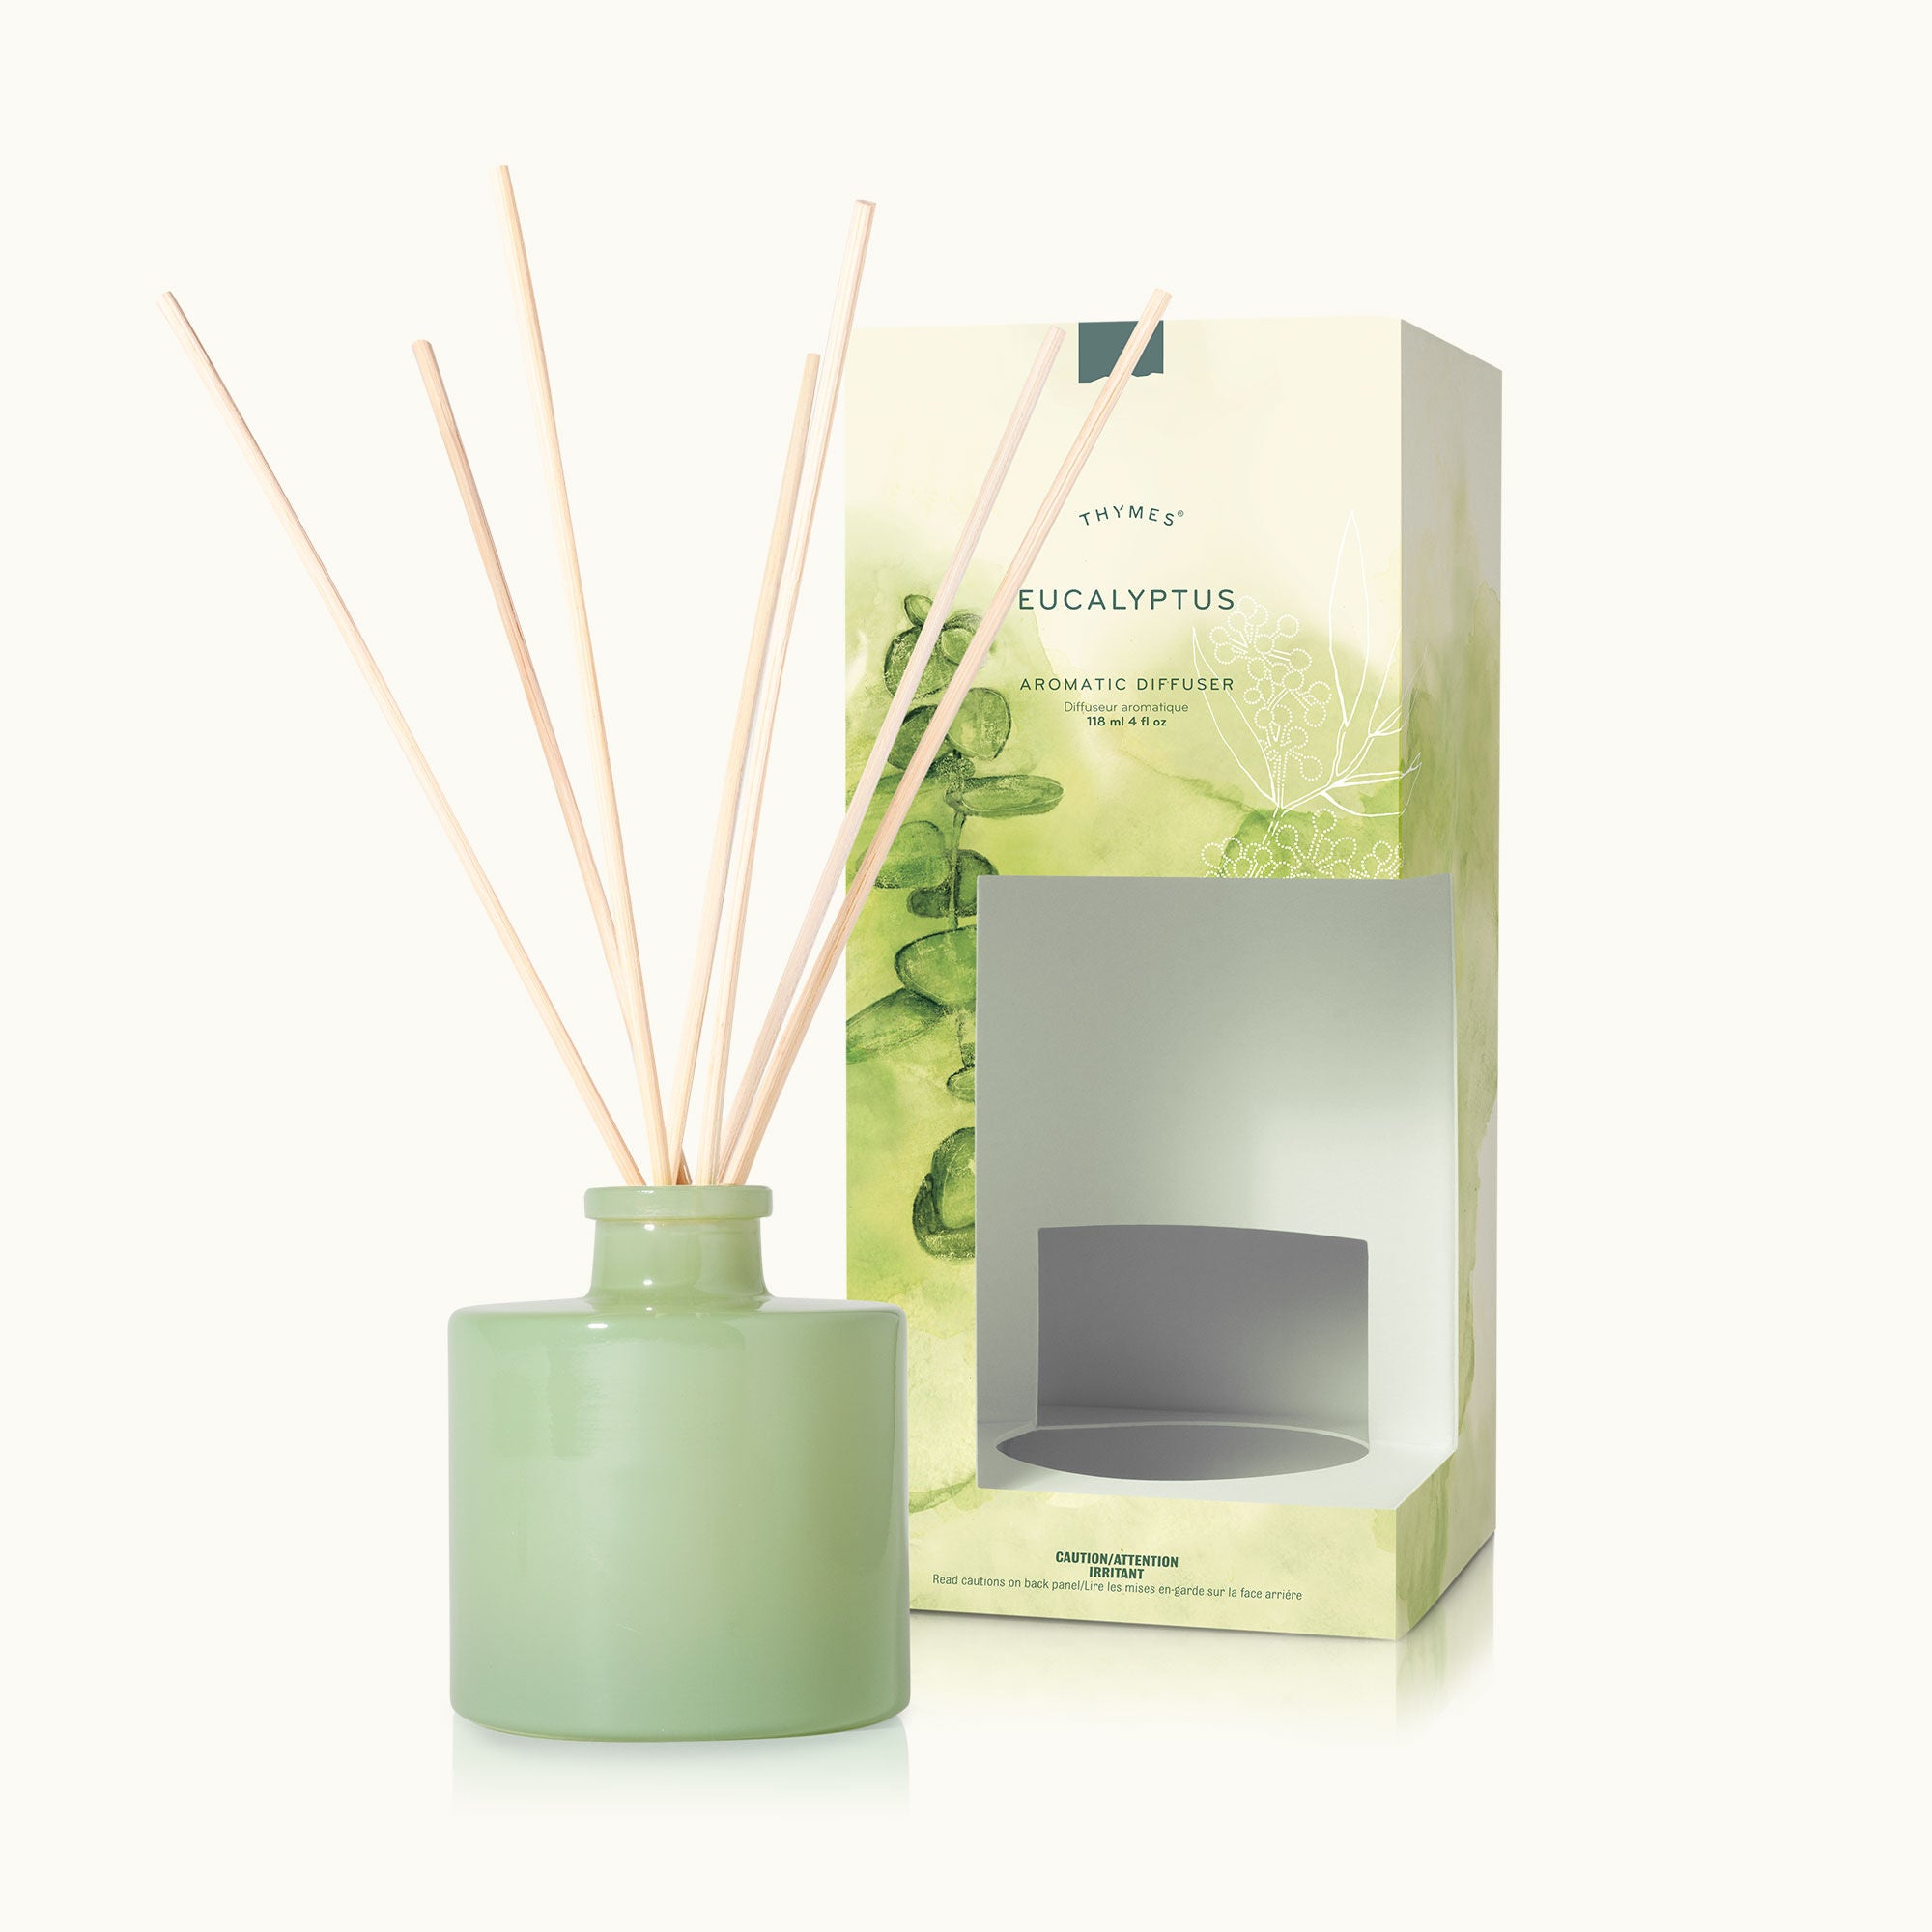 EUCALYPTUS TRAVEL-SIZE REED DIFFUSER - Molly's! A Chic and Unique Boutique 